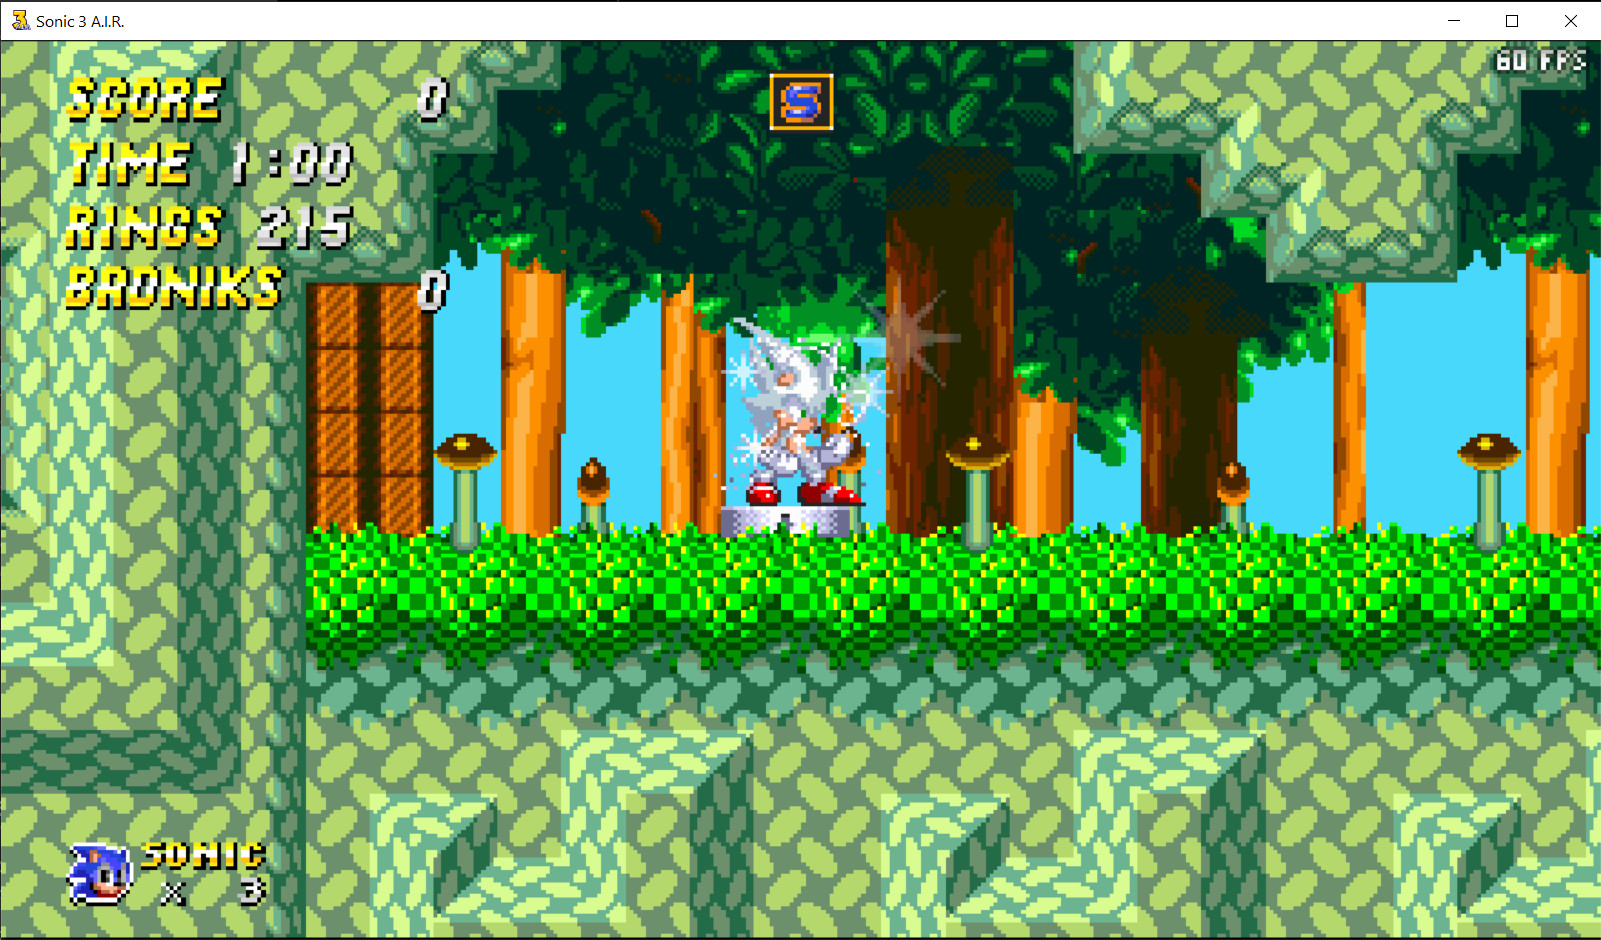 5 Different Super Sonic in Sonic 3 ~ Sonic 3 A.I.R. mods